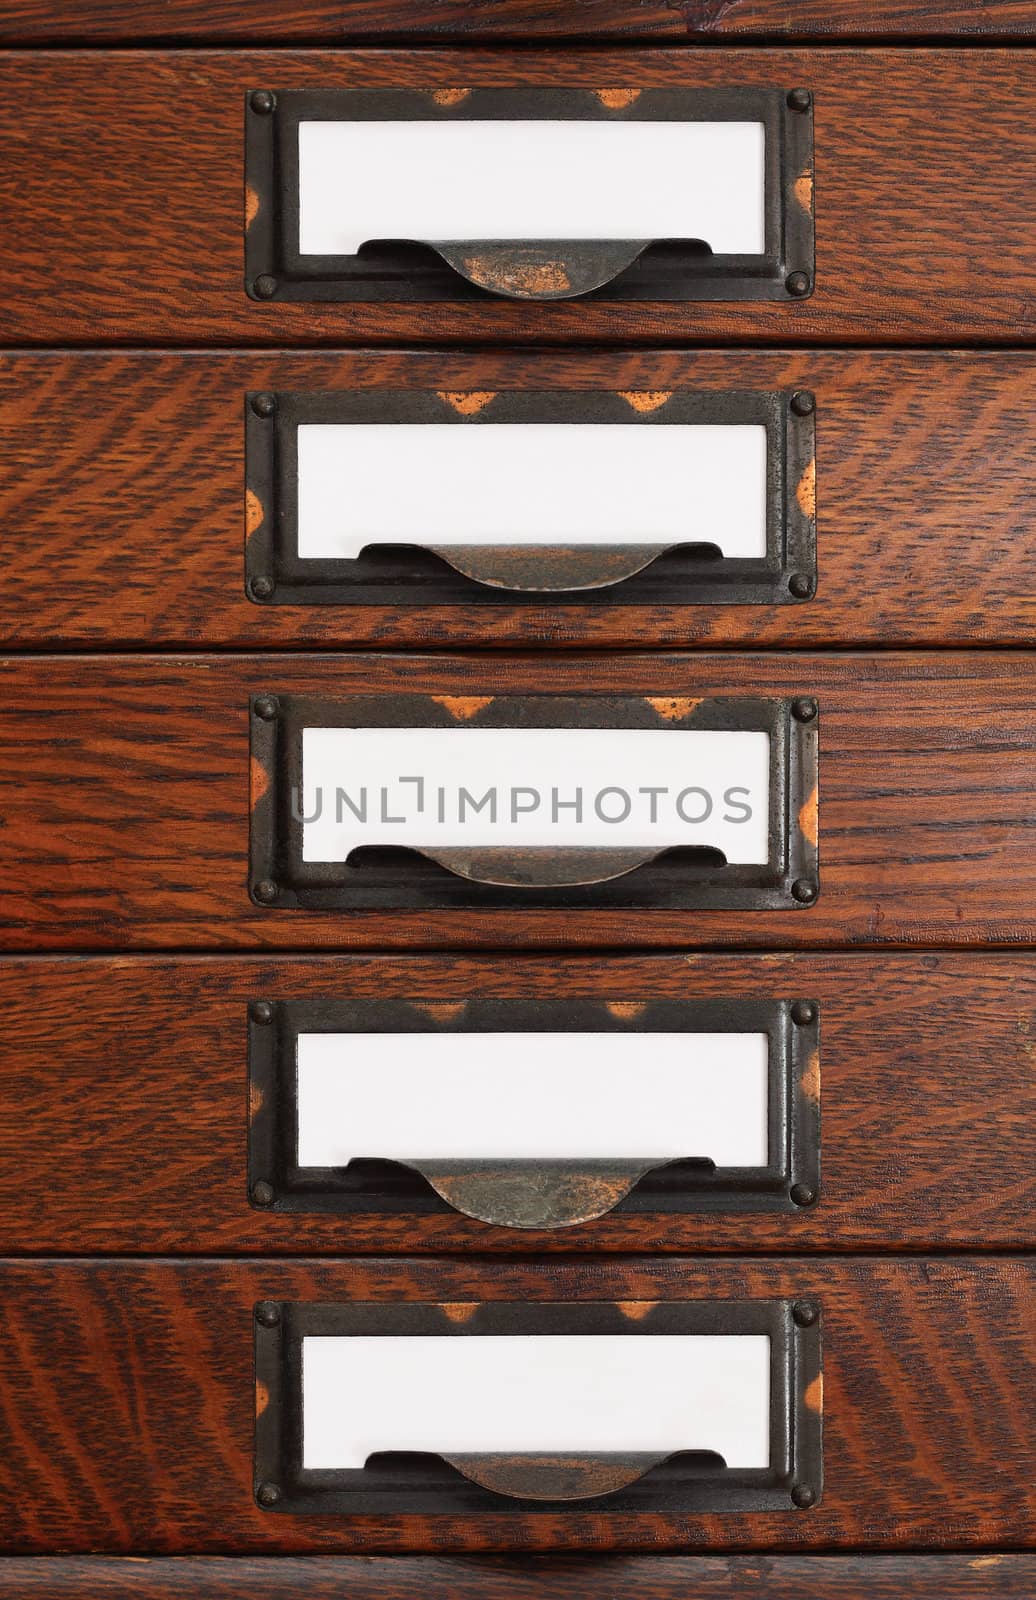 Old Flat File Drawers With Blank Labels by Em3